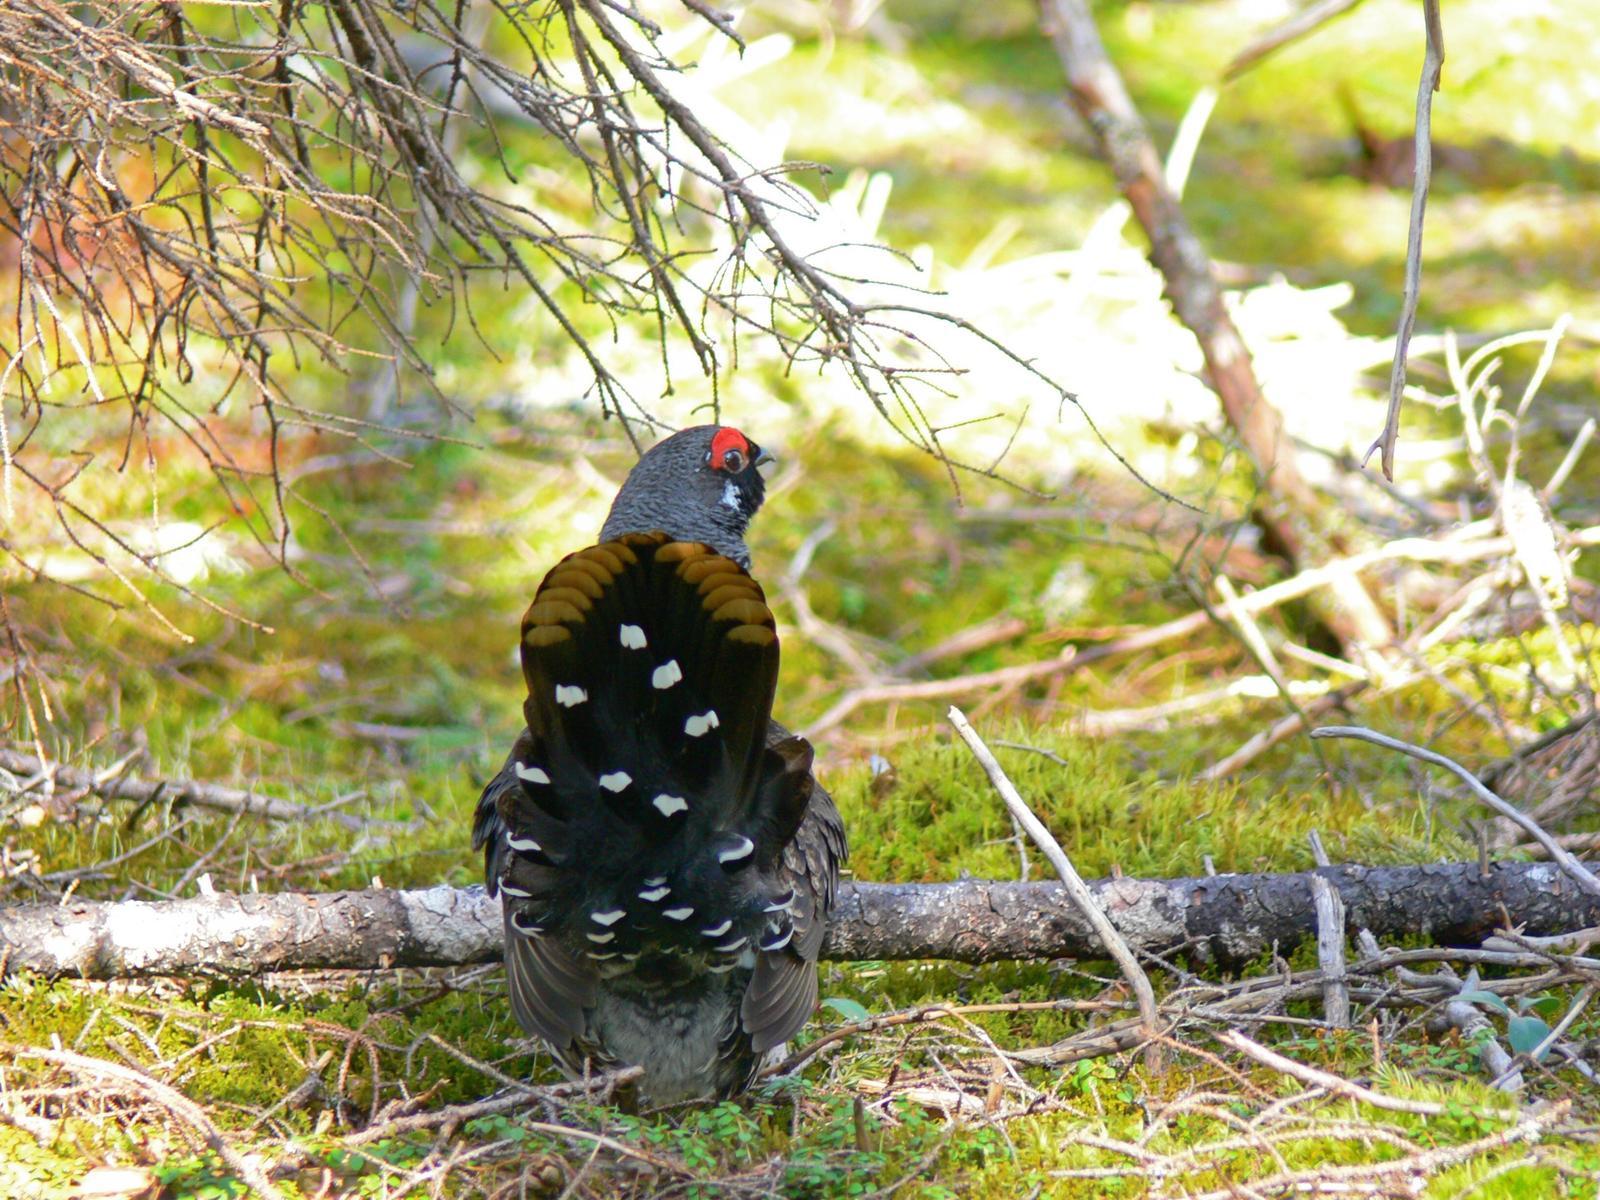 Spruce Grouse (Spruce) Photo by Tom Ford-Hutchinson